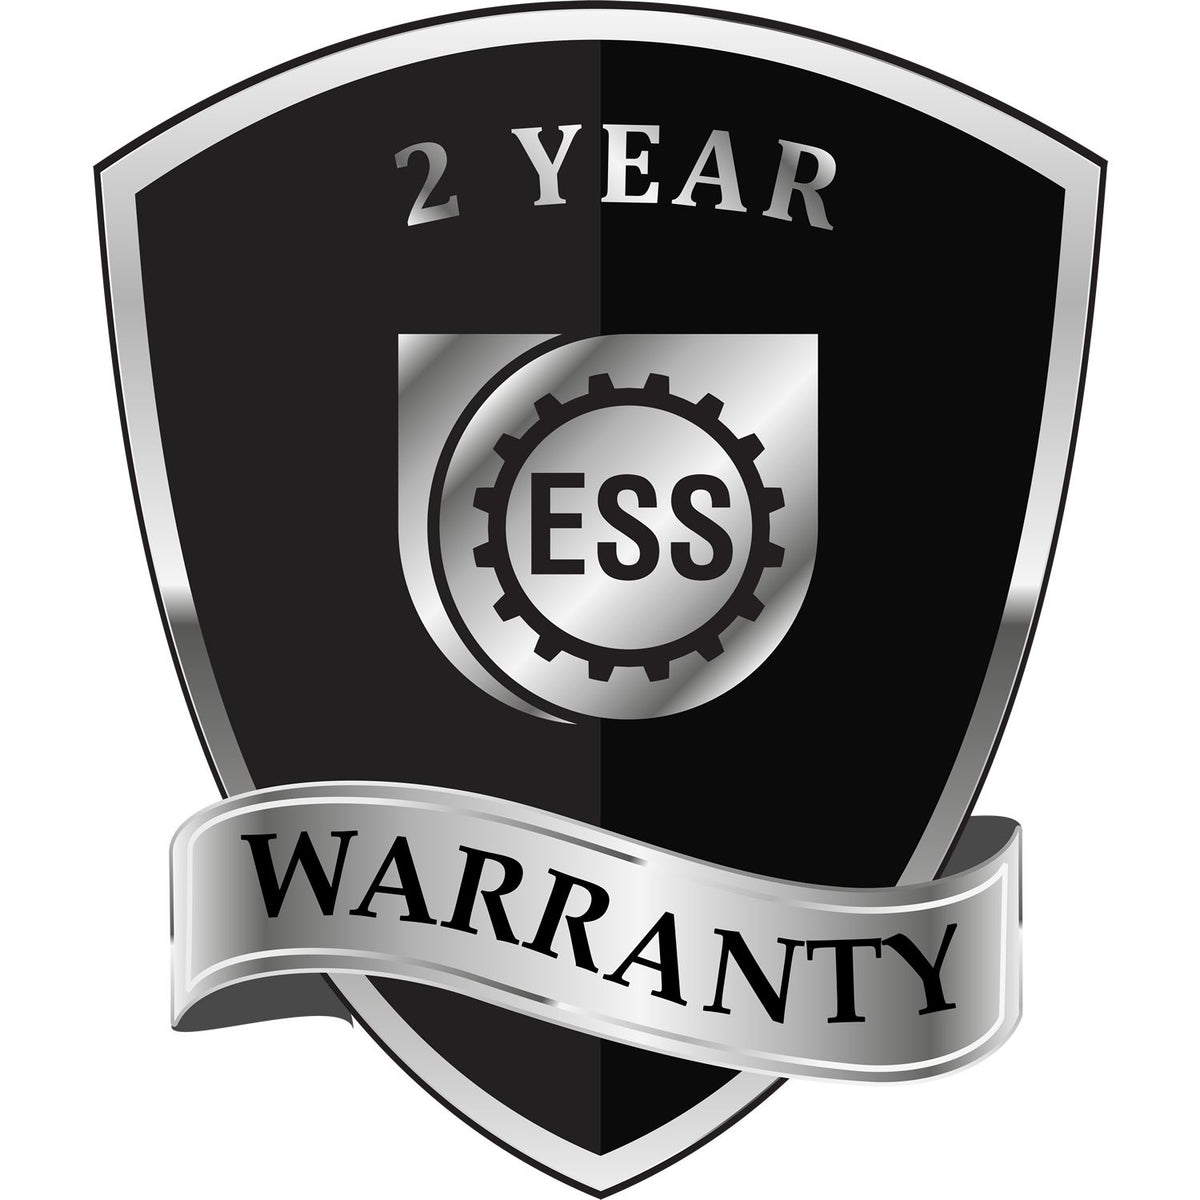 A black and silver badge or emblem showing warranty information for the Gift Iowa Geologist Seal